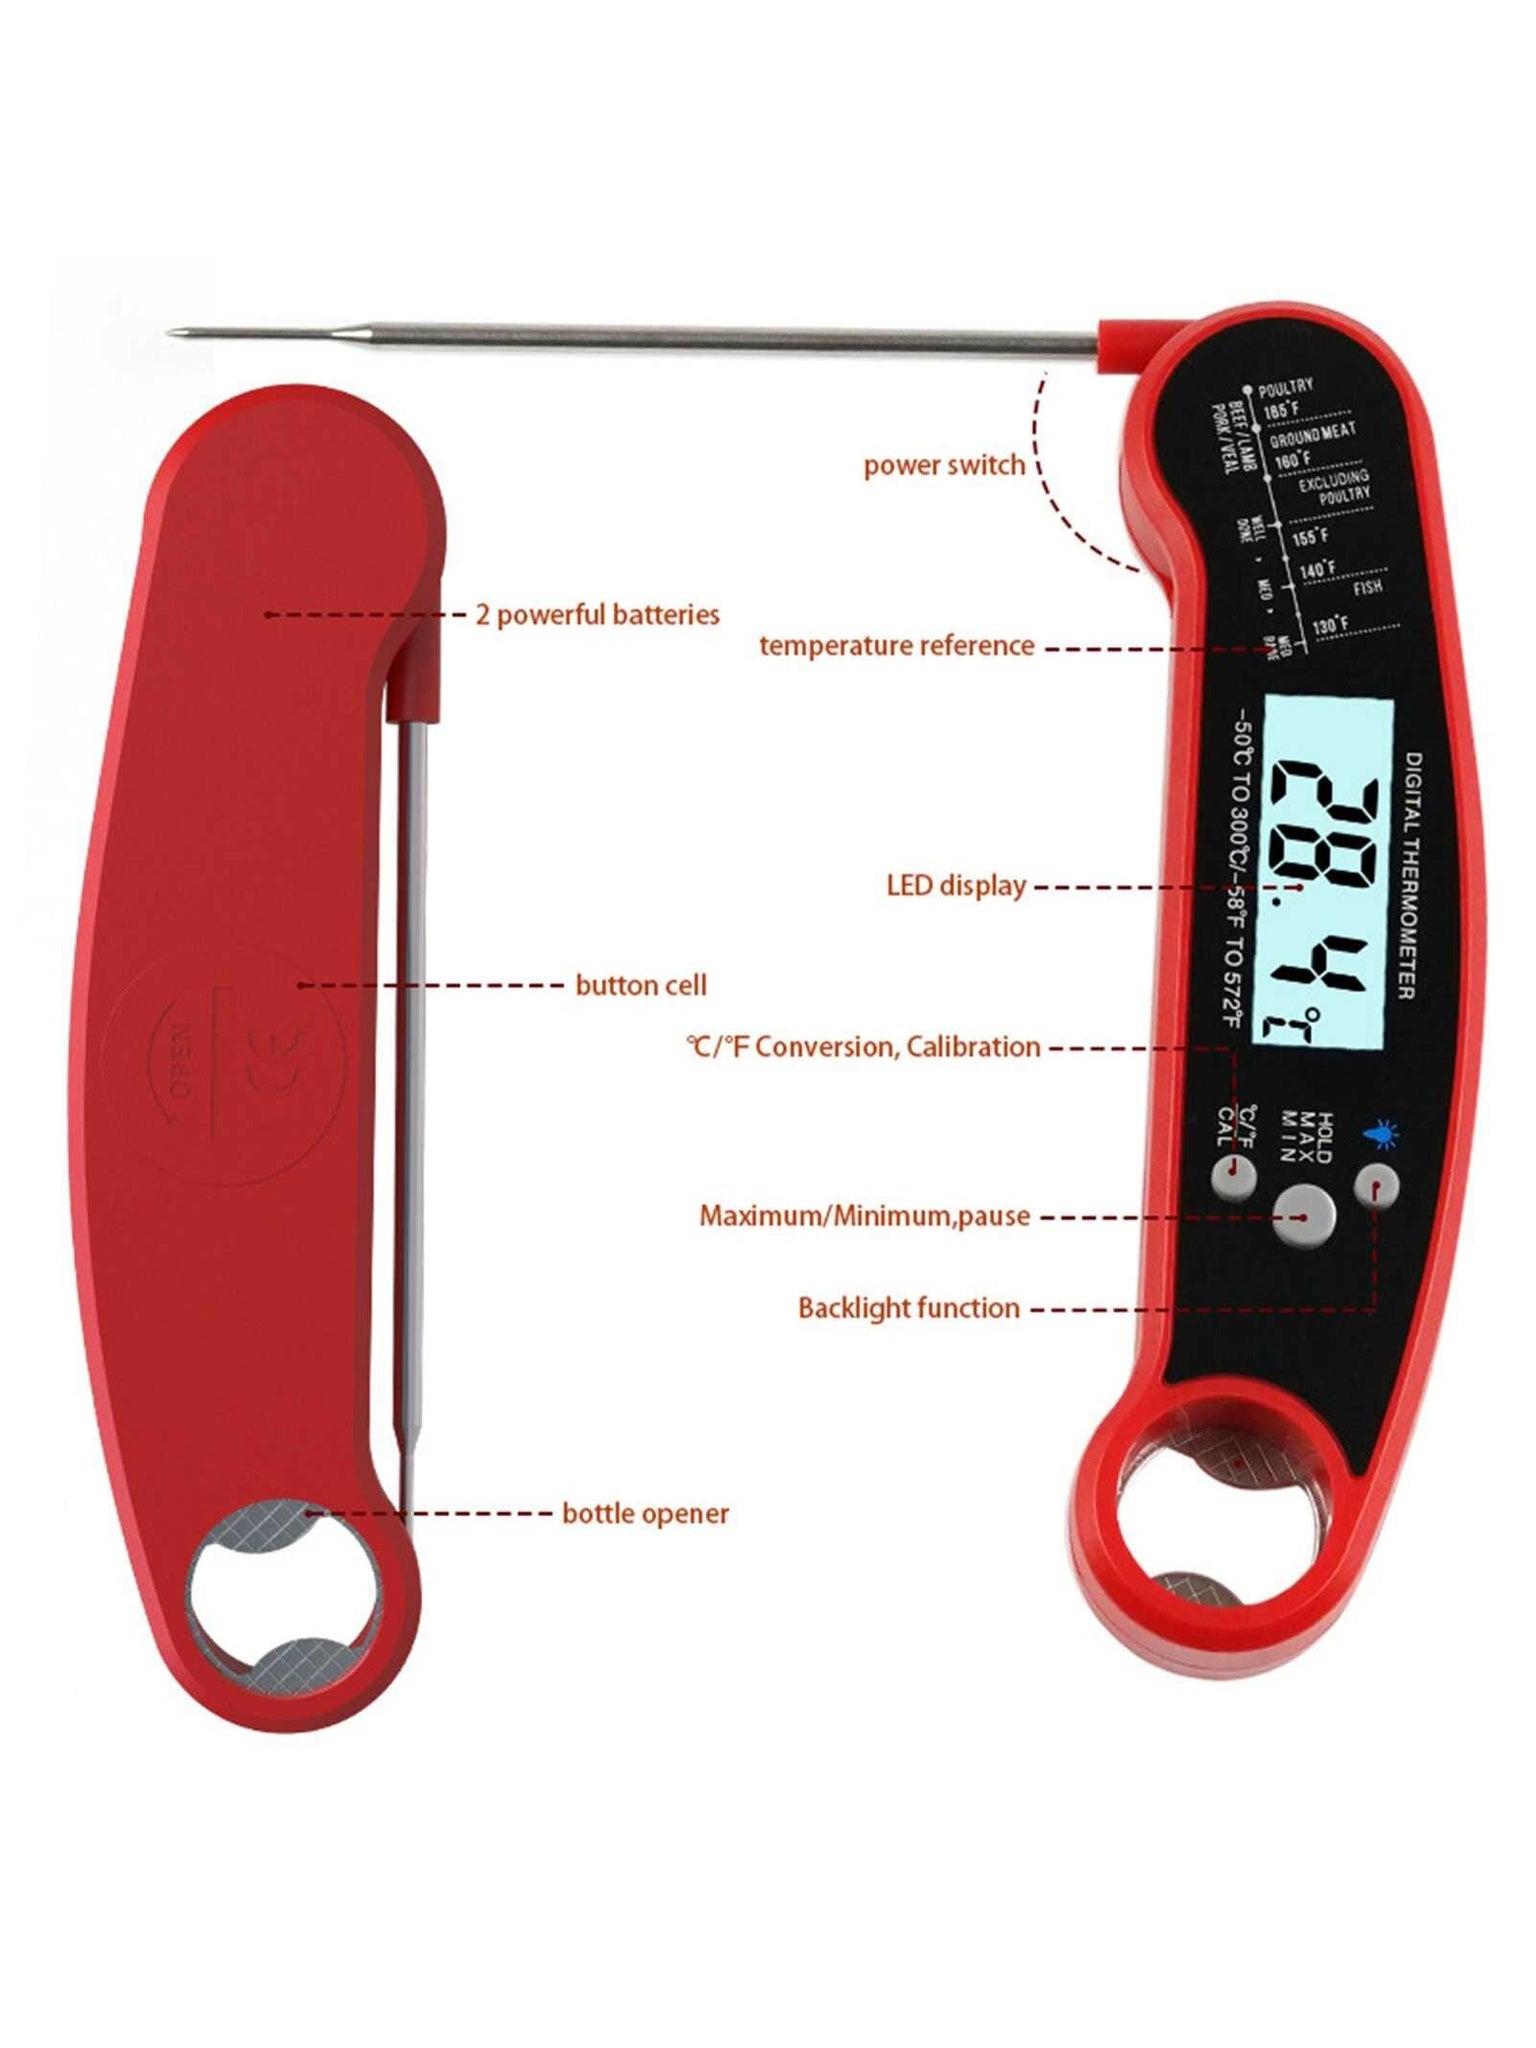 Meat Thermometer, Suitable For Barbecue And Cooking, Best Waterproof Ultra Fast, Instant Read With Backlight And Calibration, Digital Food Probe For Kitchen, Outdoor Bbq And Grilling-Reddish black-4